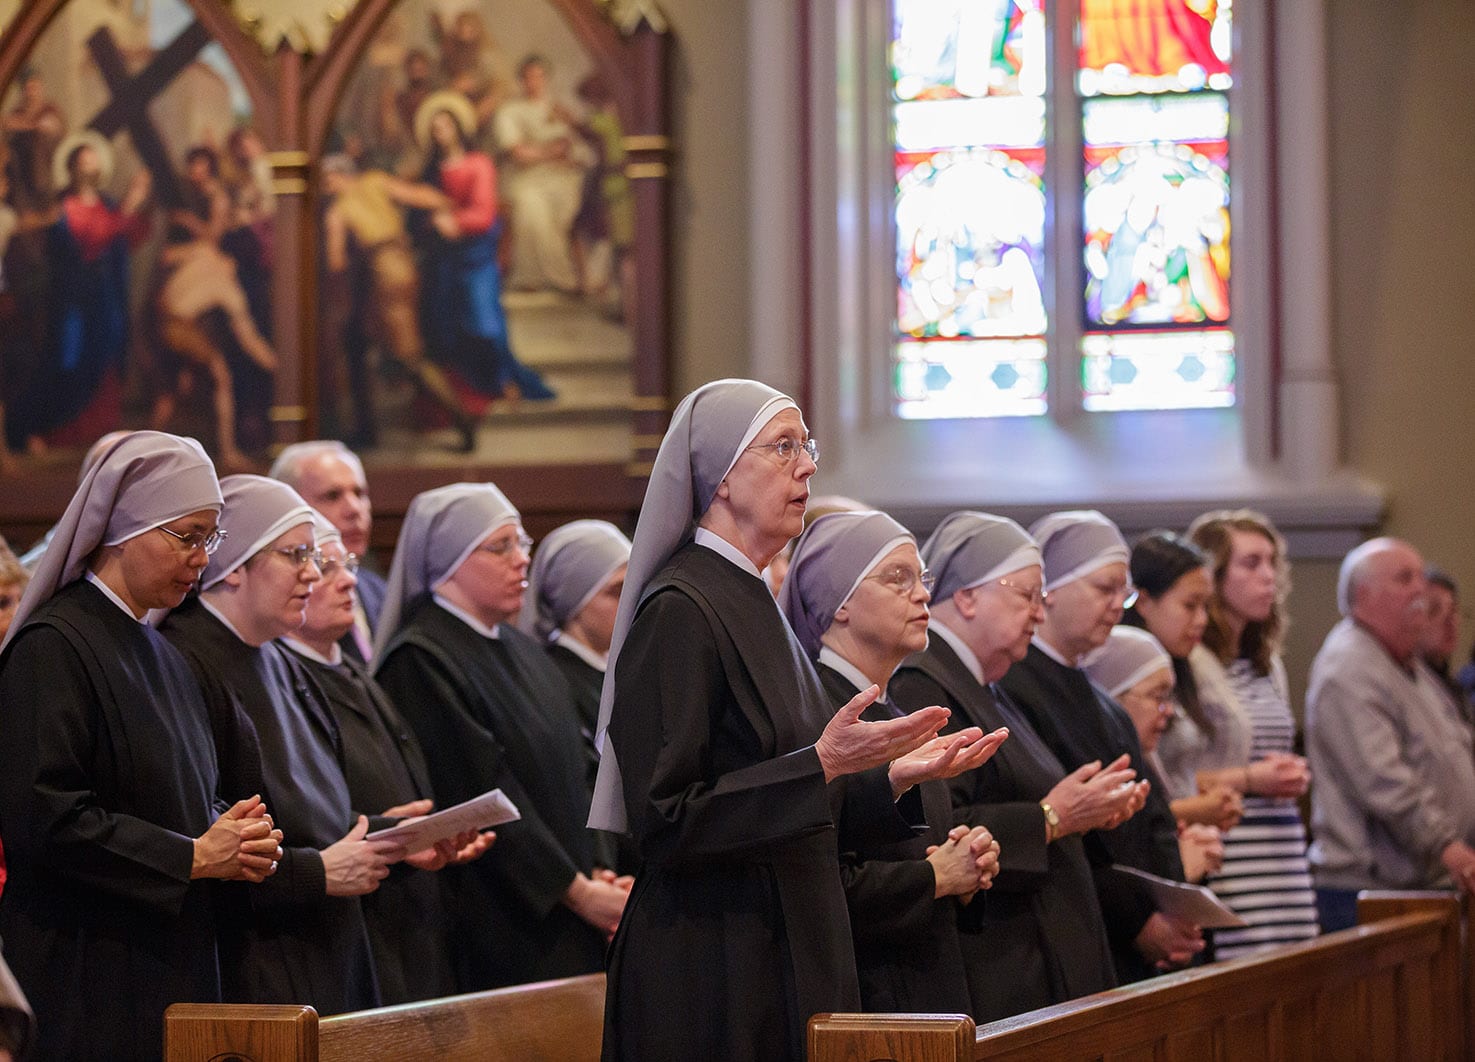 LITTLE SISTERS OF THE POOR